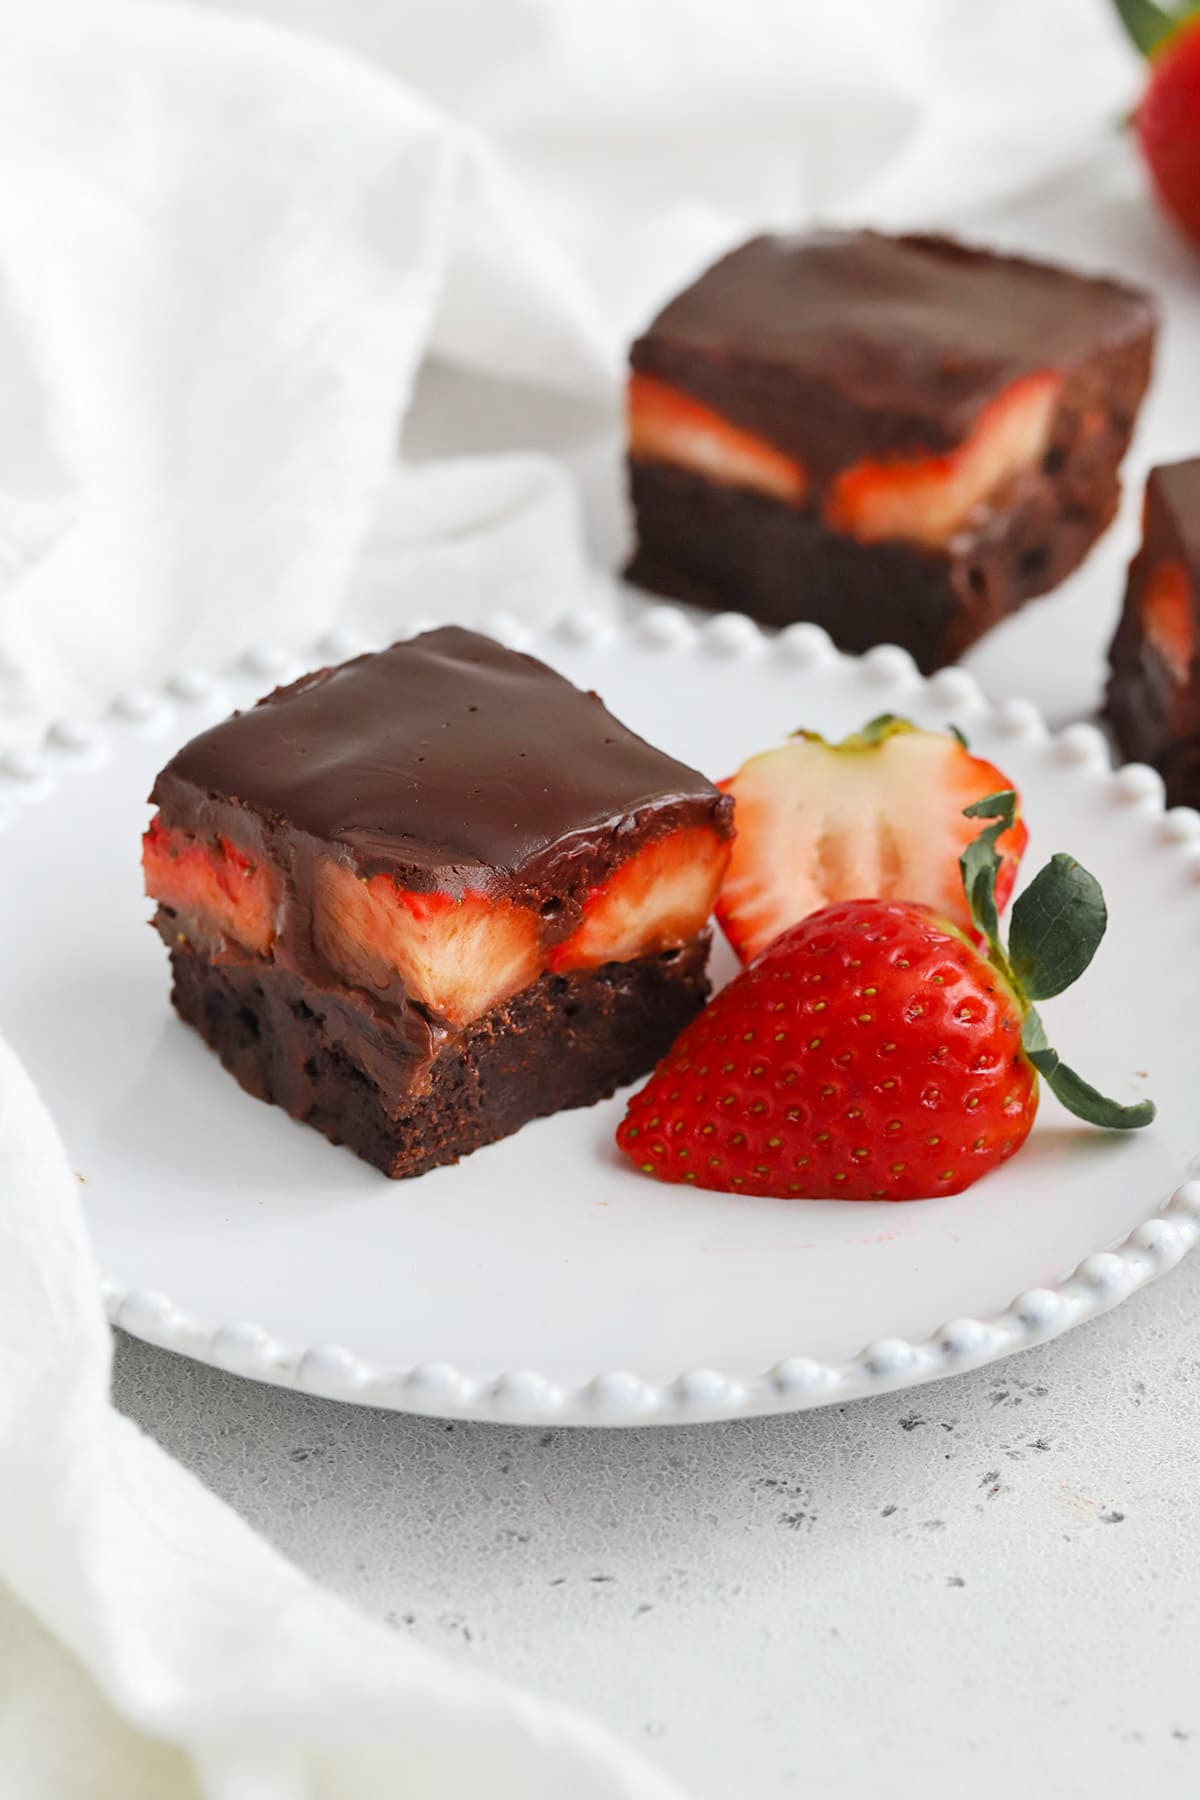 Front view of gluten-free chocolate covered strawberry brownies on a plate